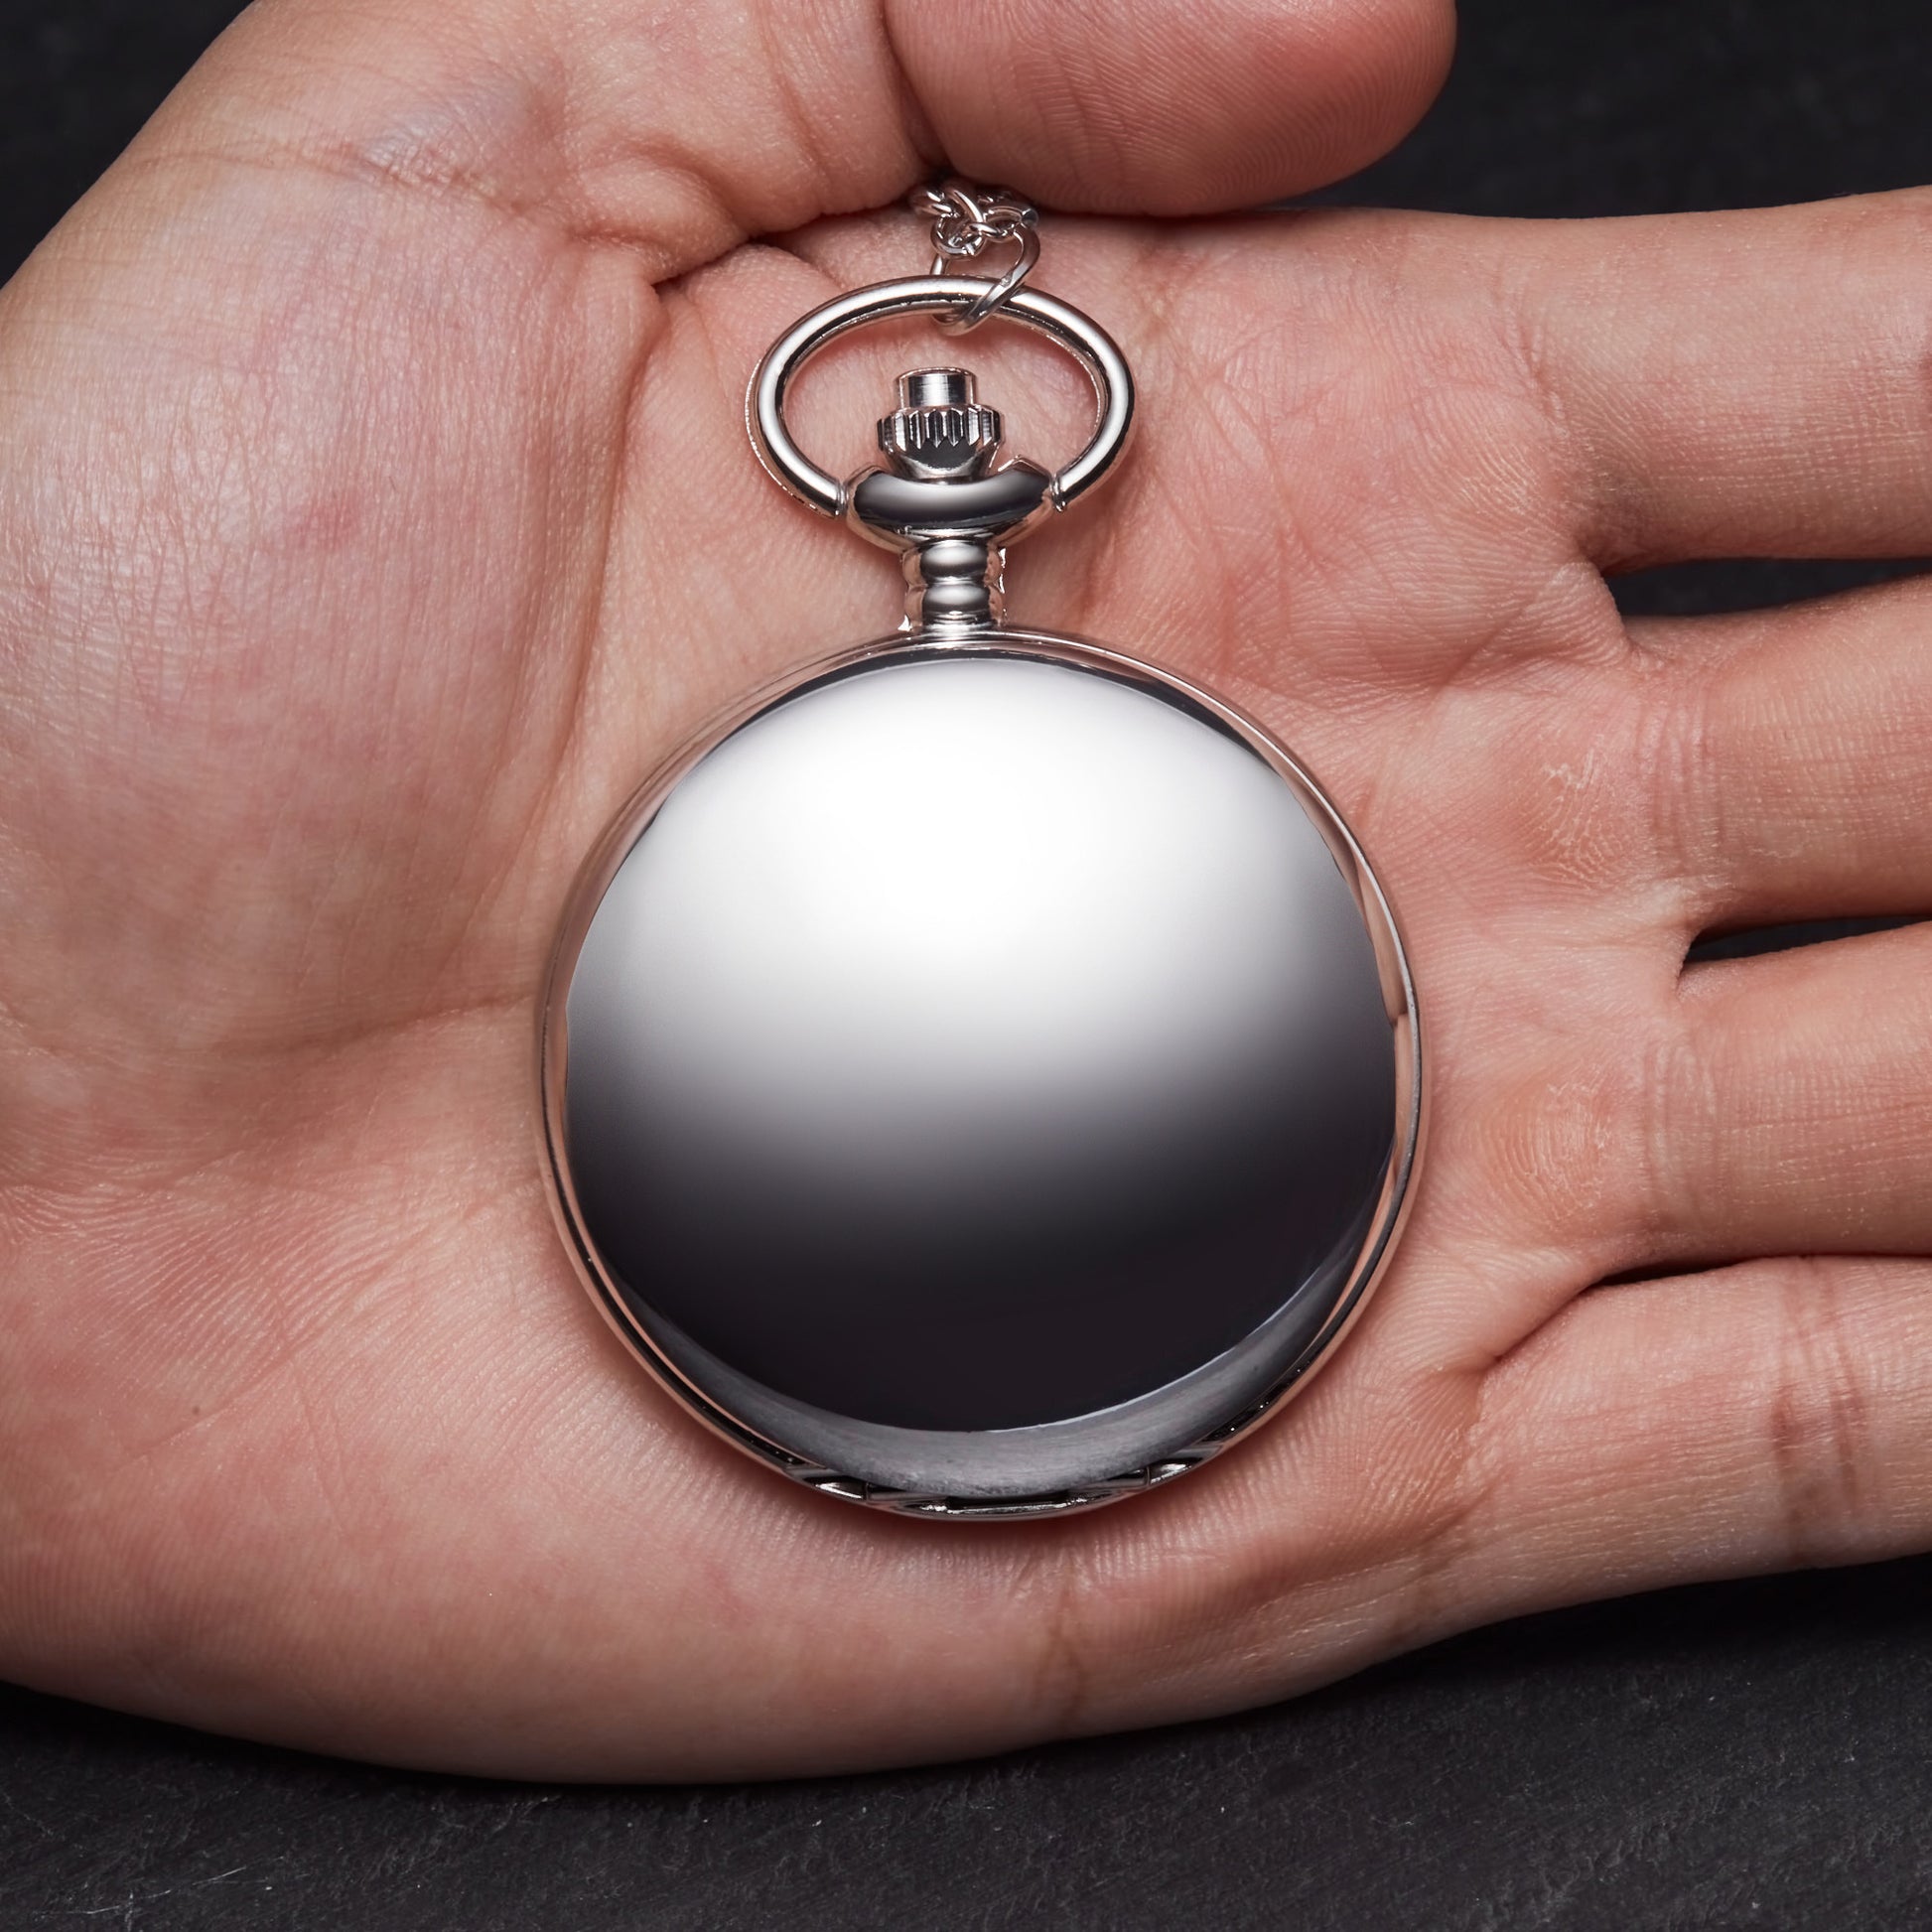 a person holding a silver pocket watch in their hand